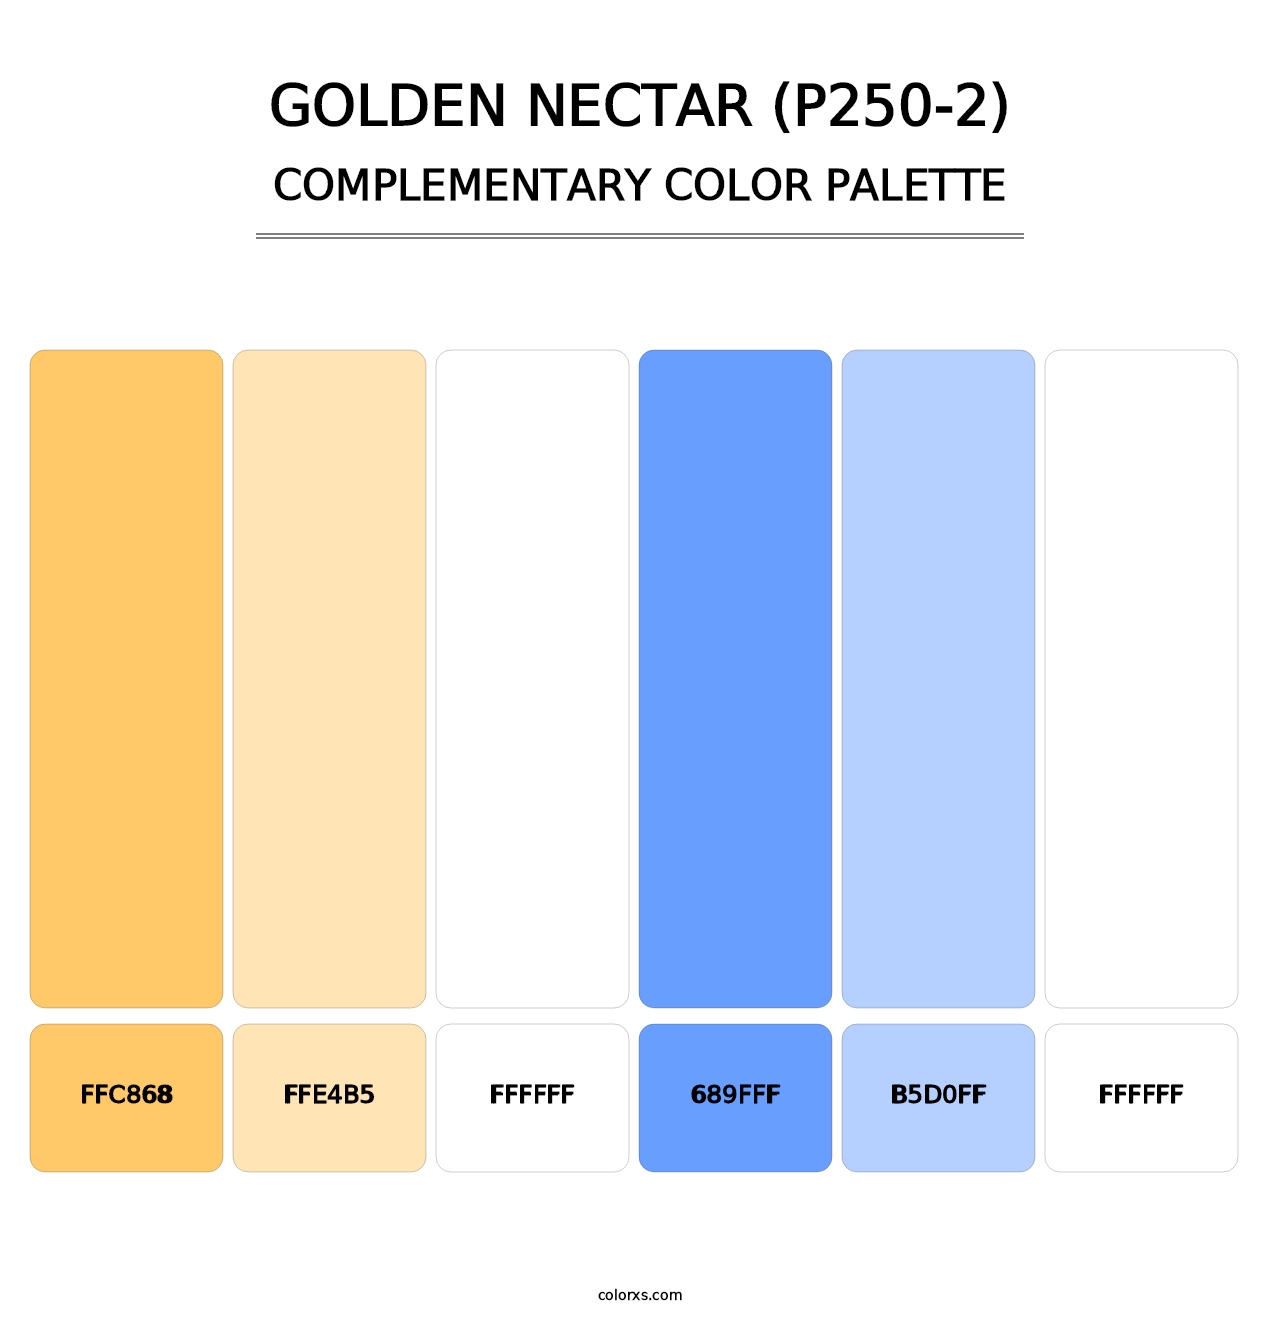 Golden Nectar (P250-2) - Complementary Color Palette